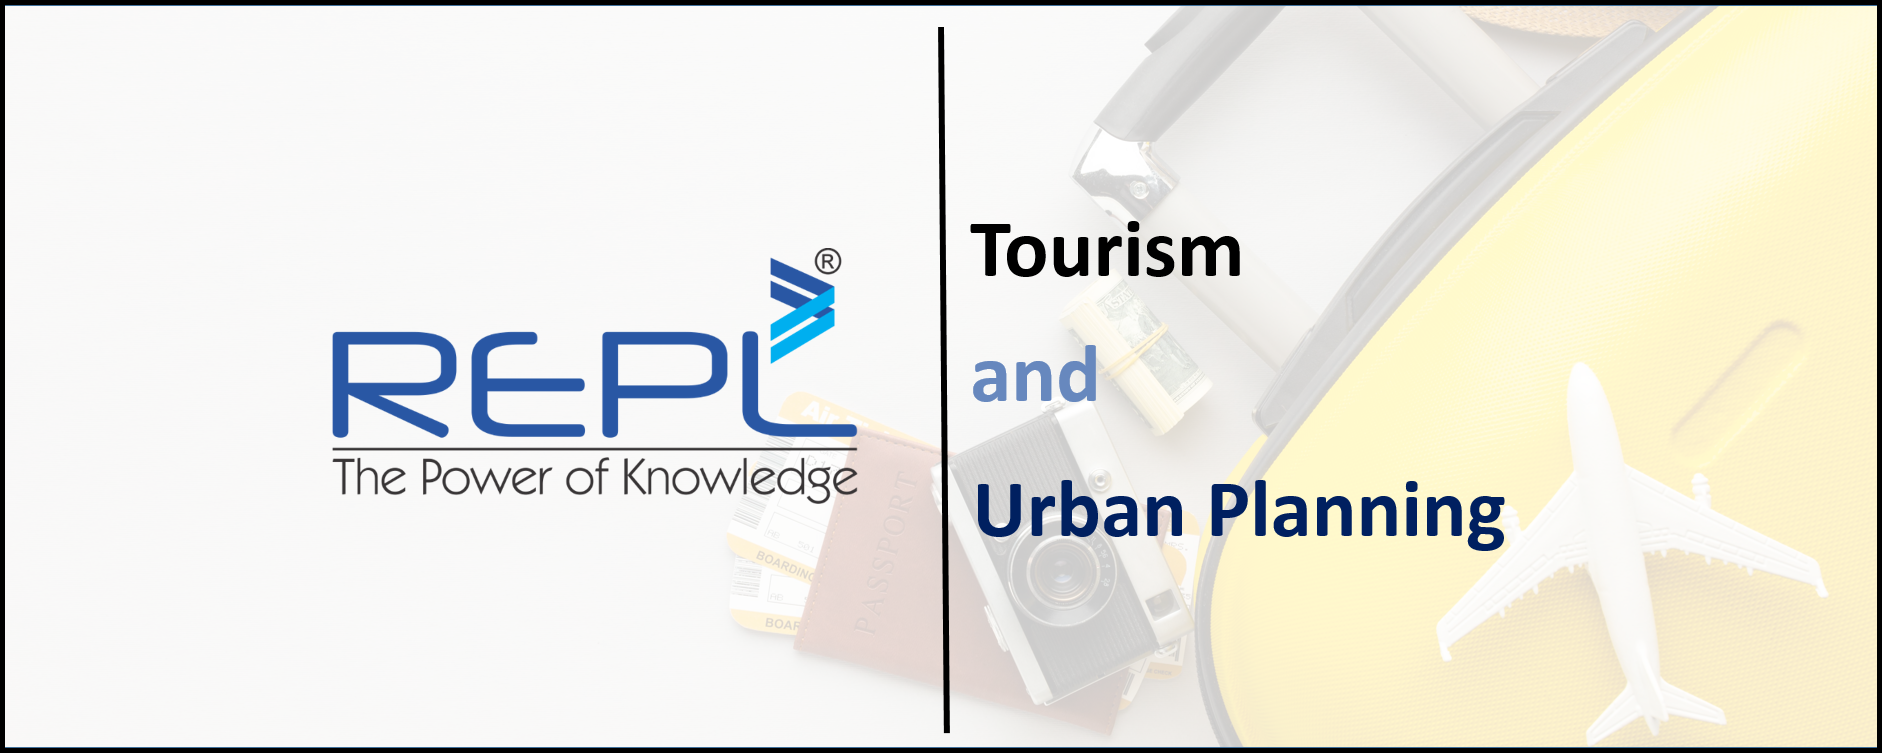 importance of urban tourism planning